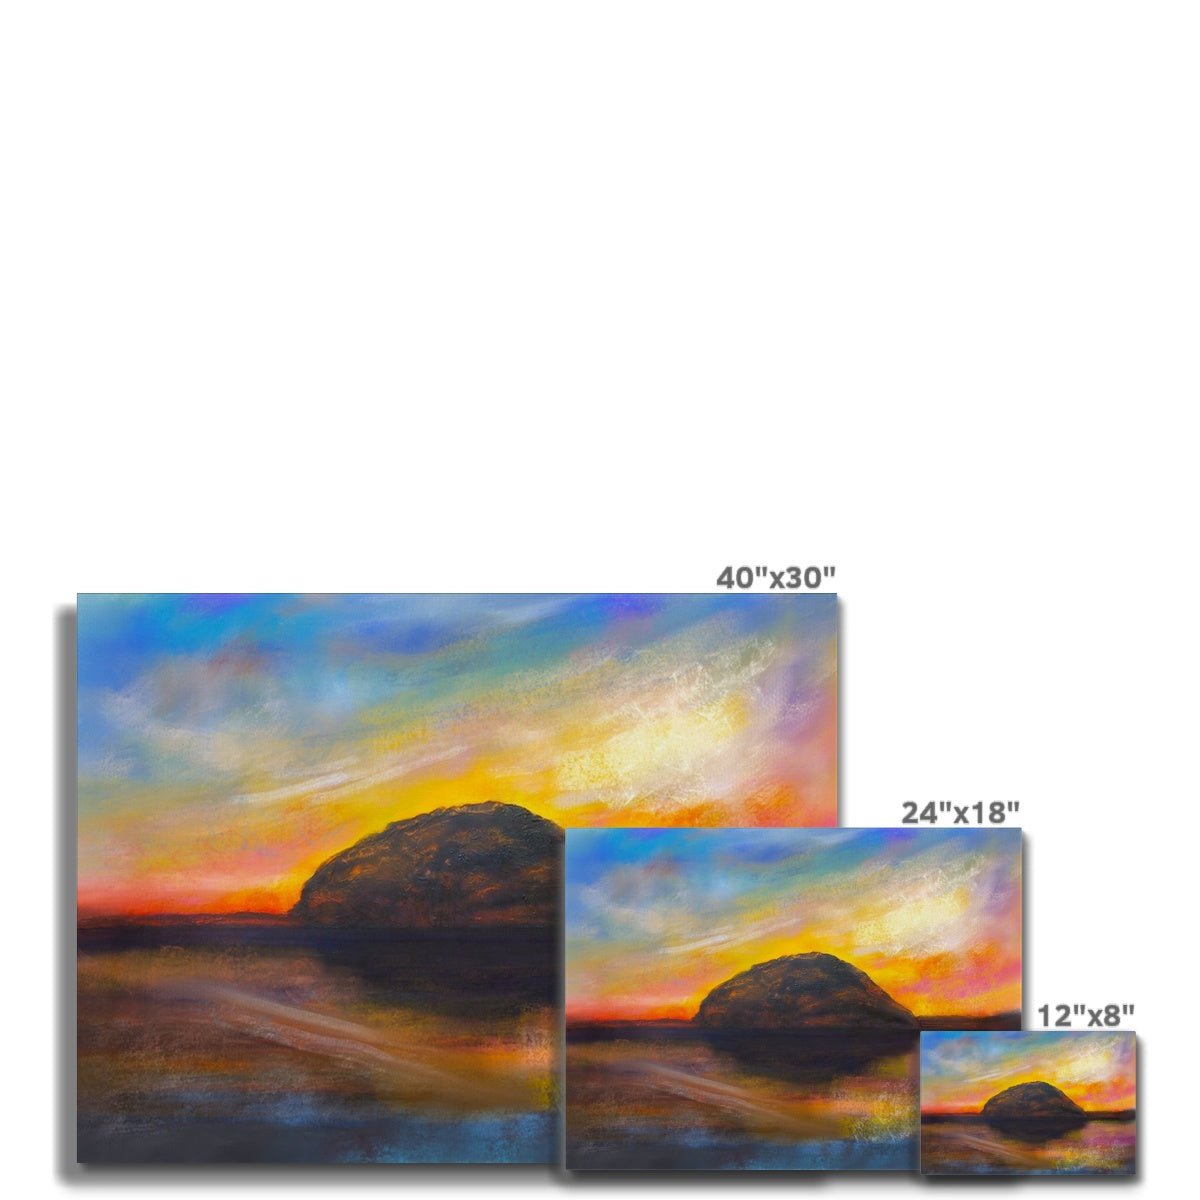 Ailsa Craig Dusk Painting | Canvas From Scotland-Contemporary Stretched Canvas Prints-Arran Art Gallery-Paintings, Prints, Homeware, Art Gifts From Scotland By Scottish Artist Kevin Hunter